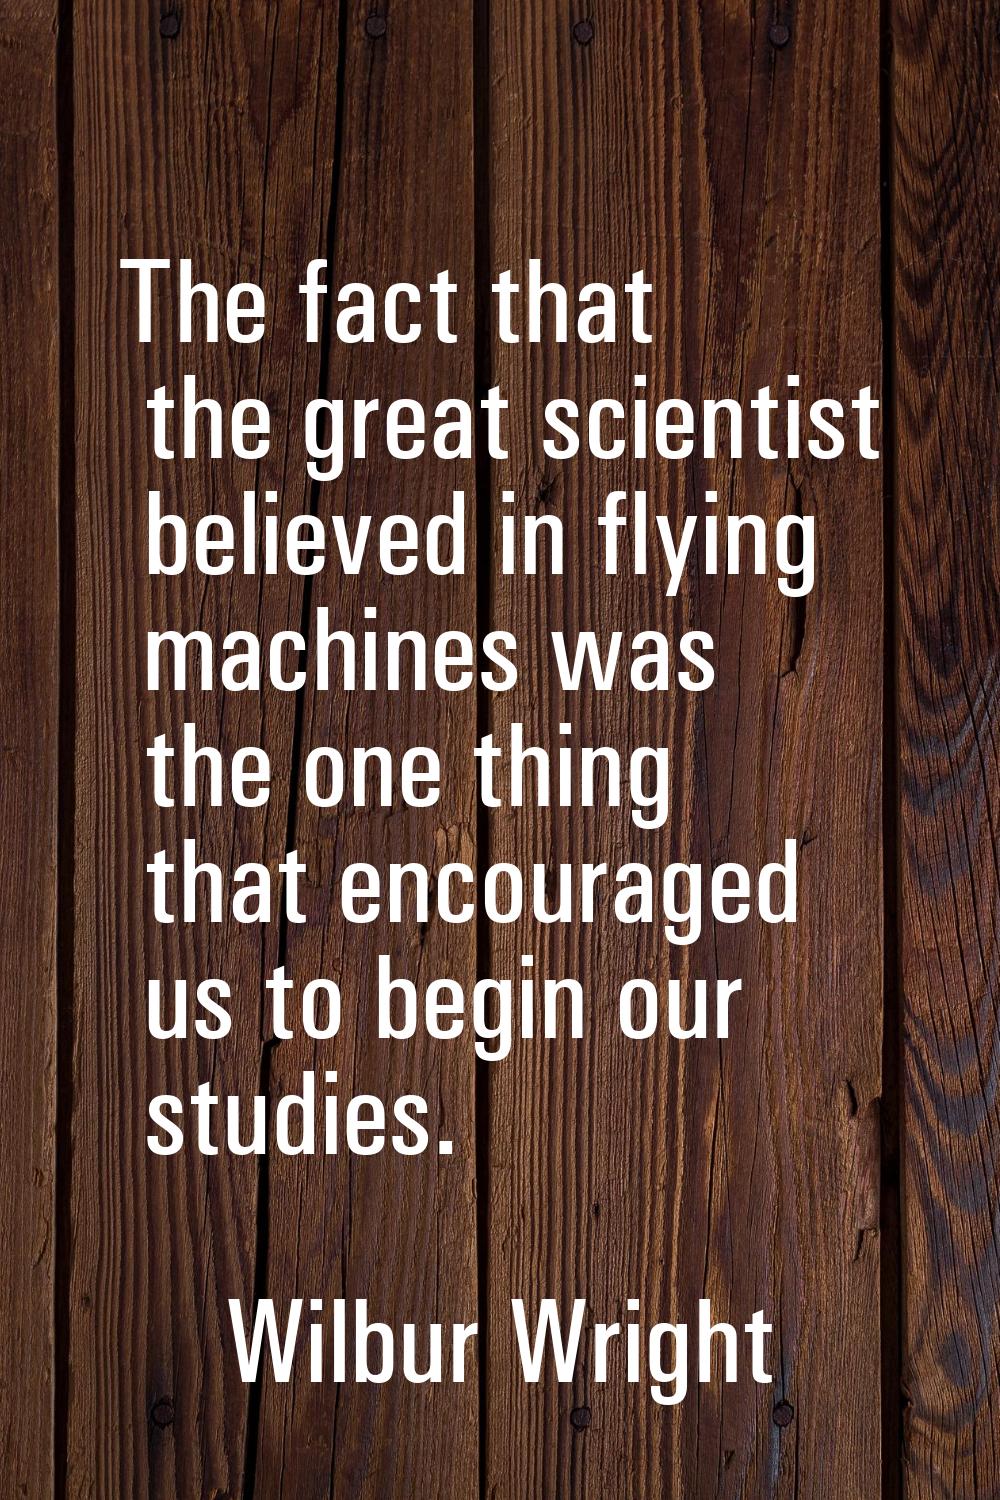 The fact that the great scientist believed in flying machines was the one thing that encouraged us 